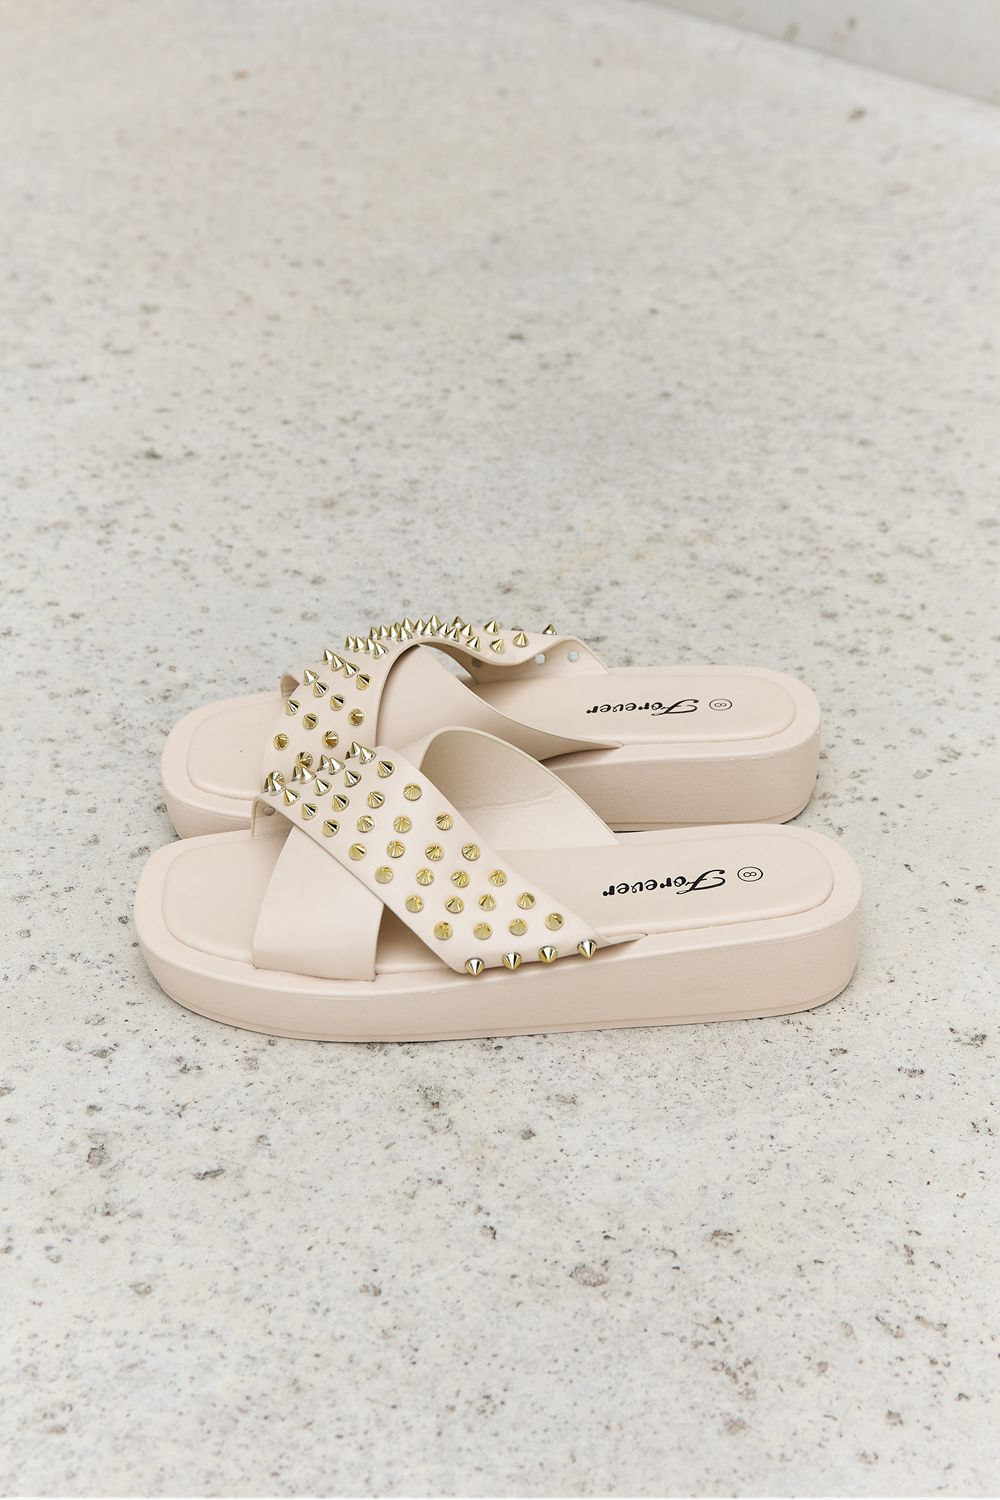 Studded Cross Strap Sandals in Cream